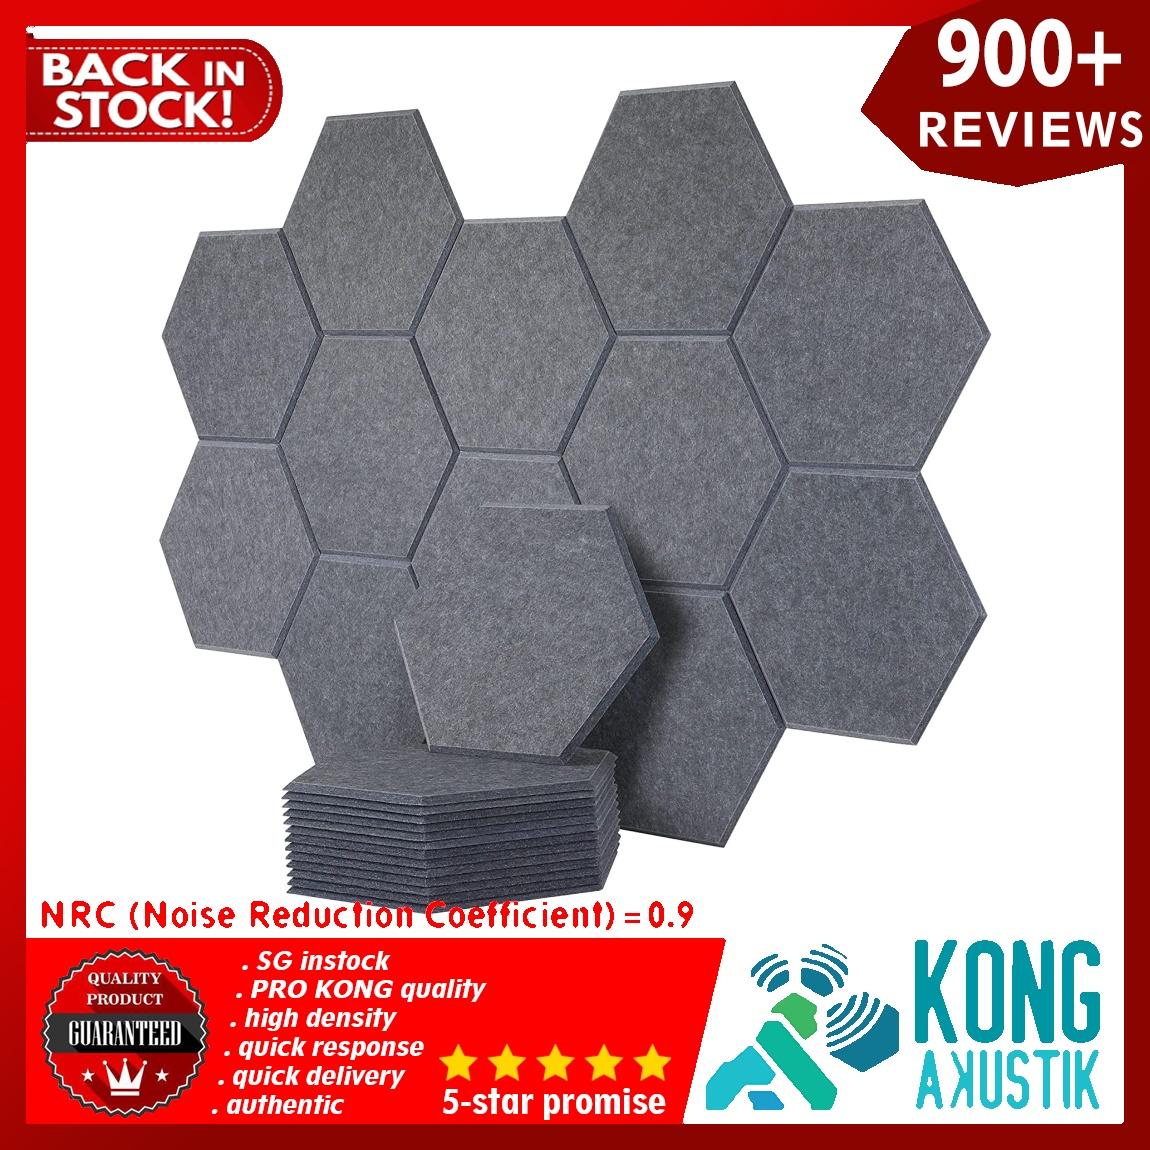 Blue 12 X 14 X 0.4 Inches Acoustic Soundproofing Insulation Panel Beveled Edge Tiles Great for Wall Decoration and Acoustic Treatment 12 Pack Set Hexagon Acoustic Absorption Panel 